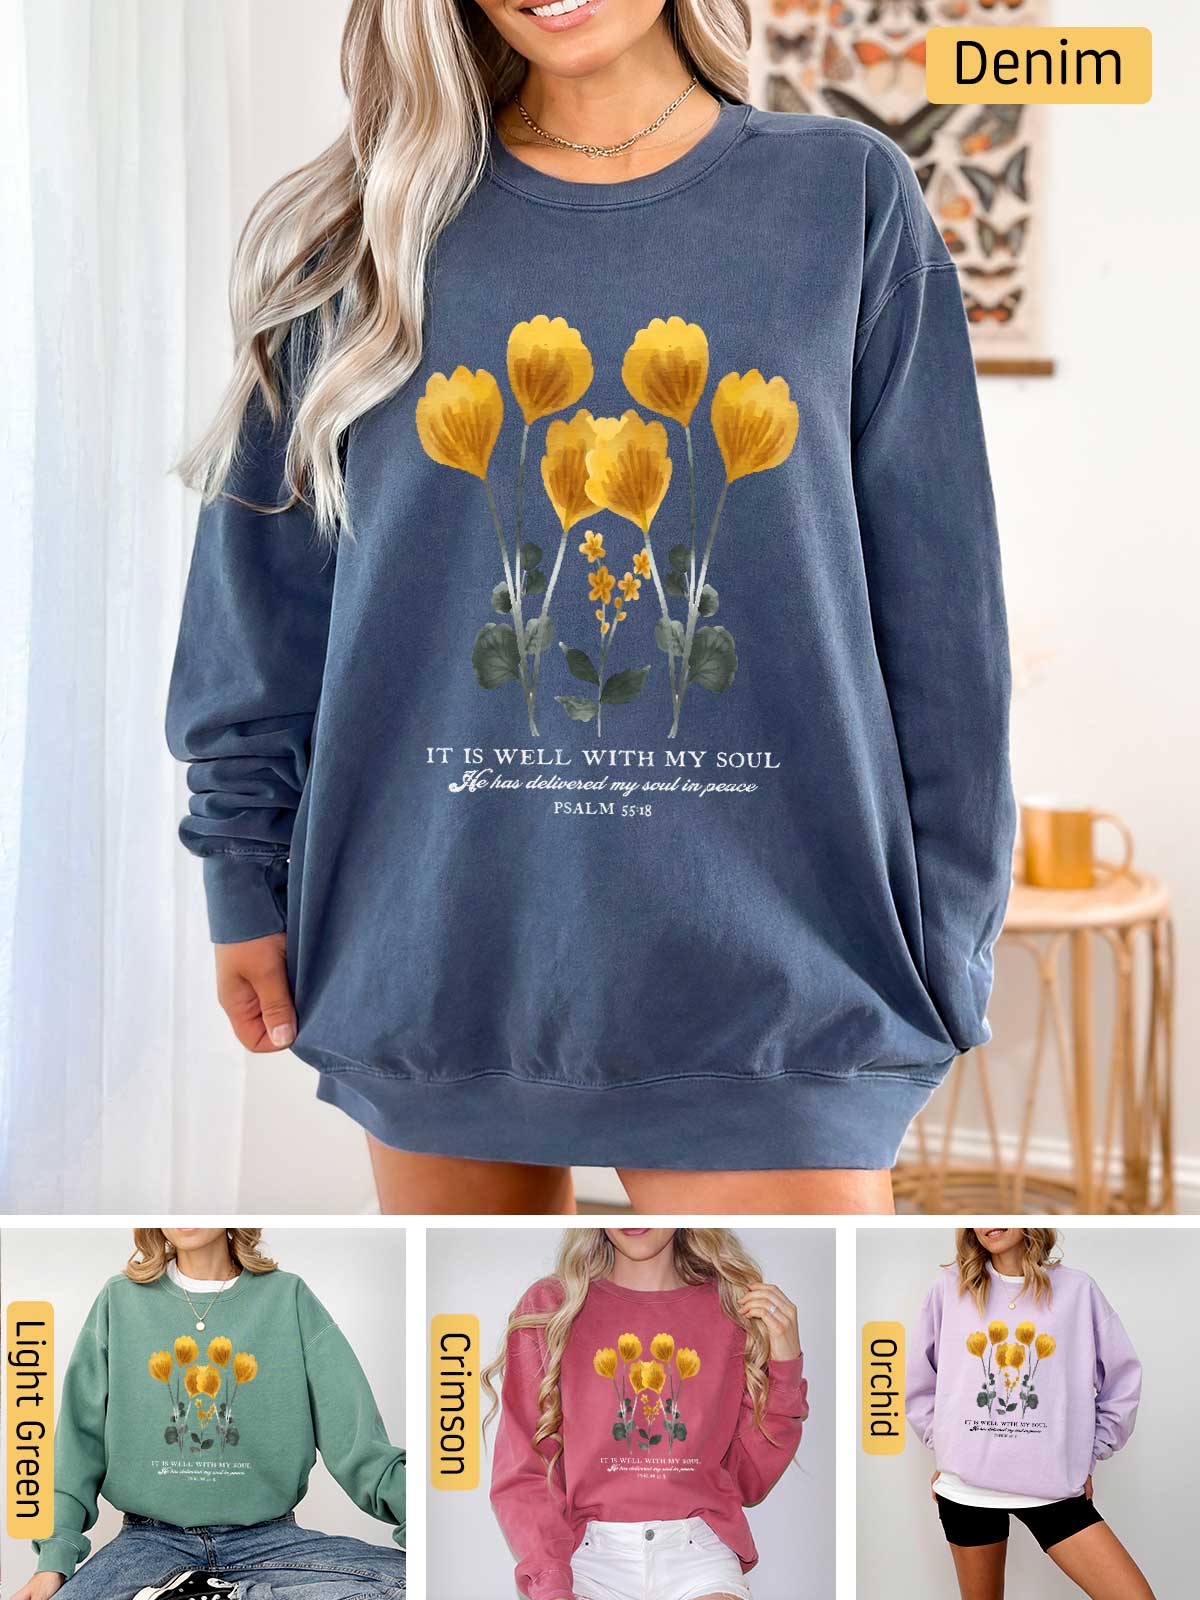 a woman wearing a sweatshirt with yellow flowers on it